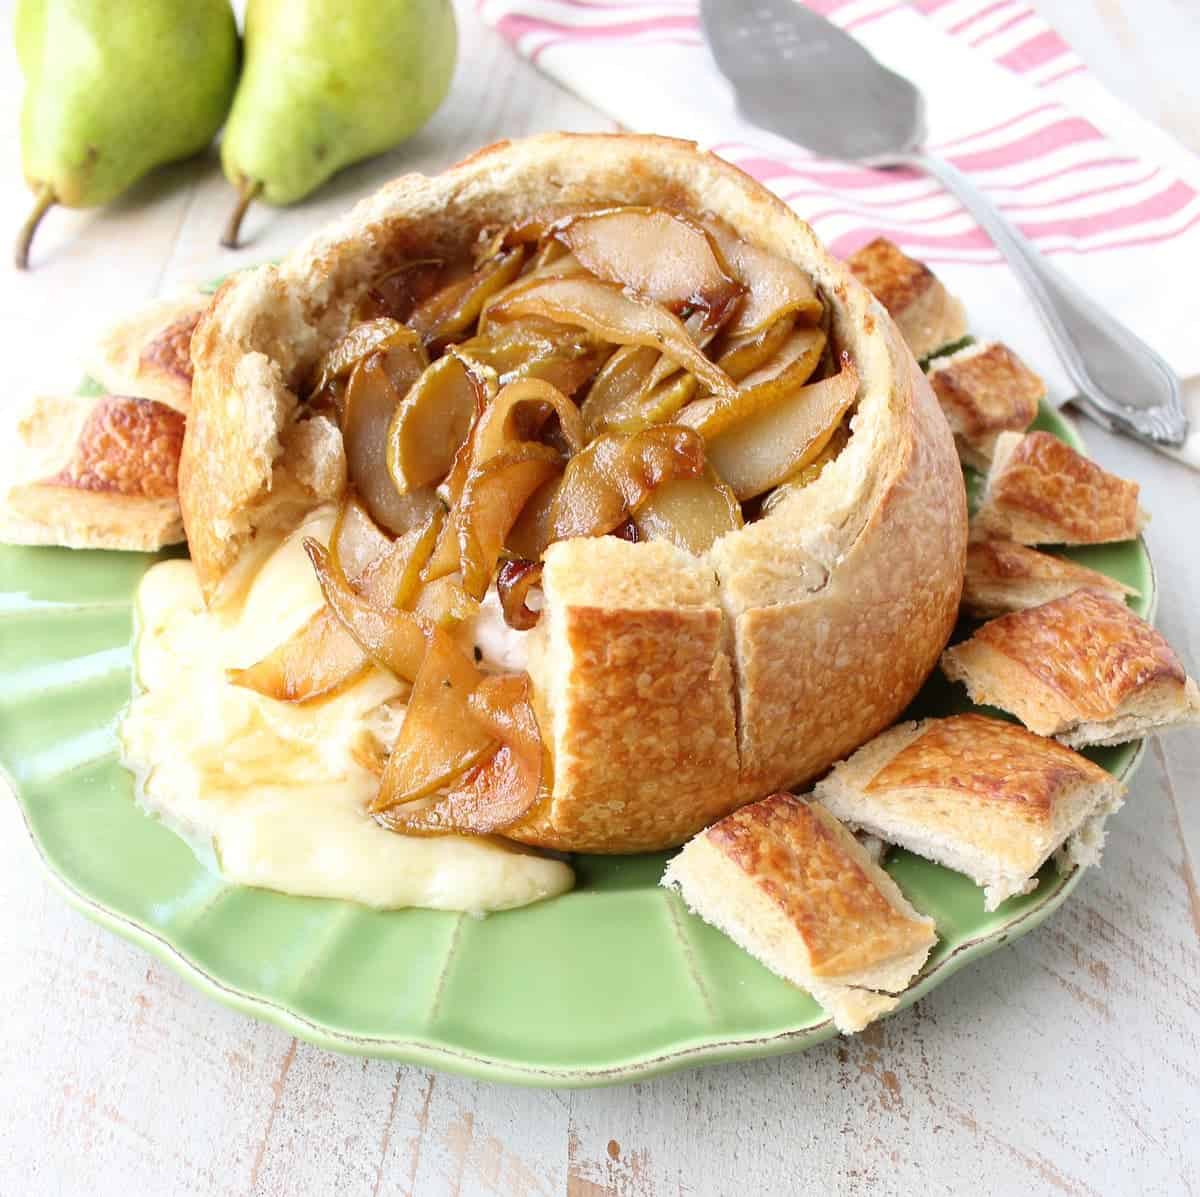 Baked Brie &amp; Caramelized Pear Sourdough Bread Bowl Recipe